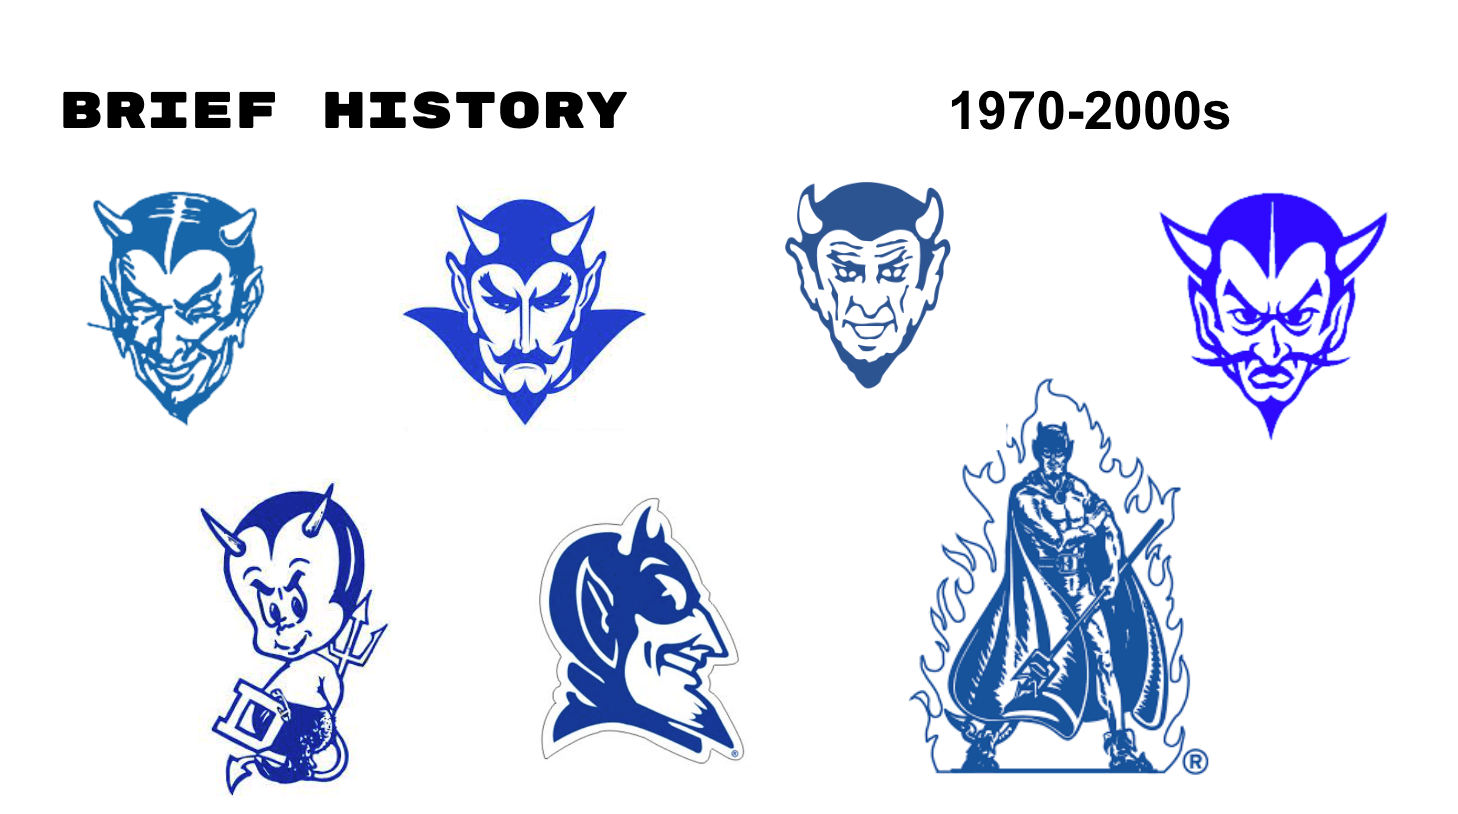 Five different Blue Devils pictured. Styling varies dramatically.